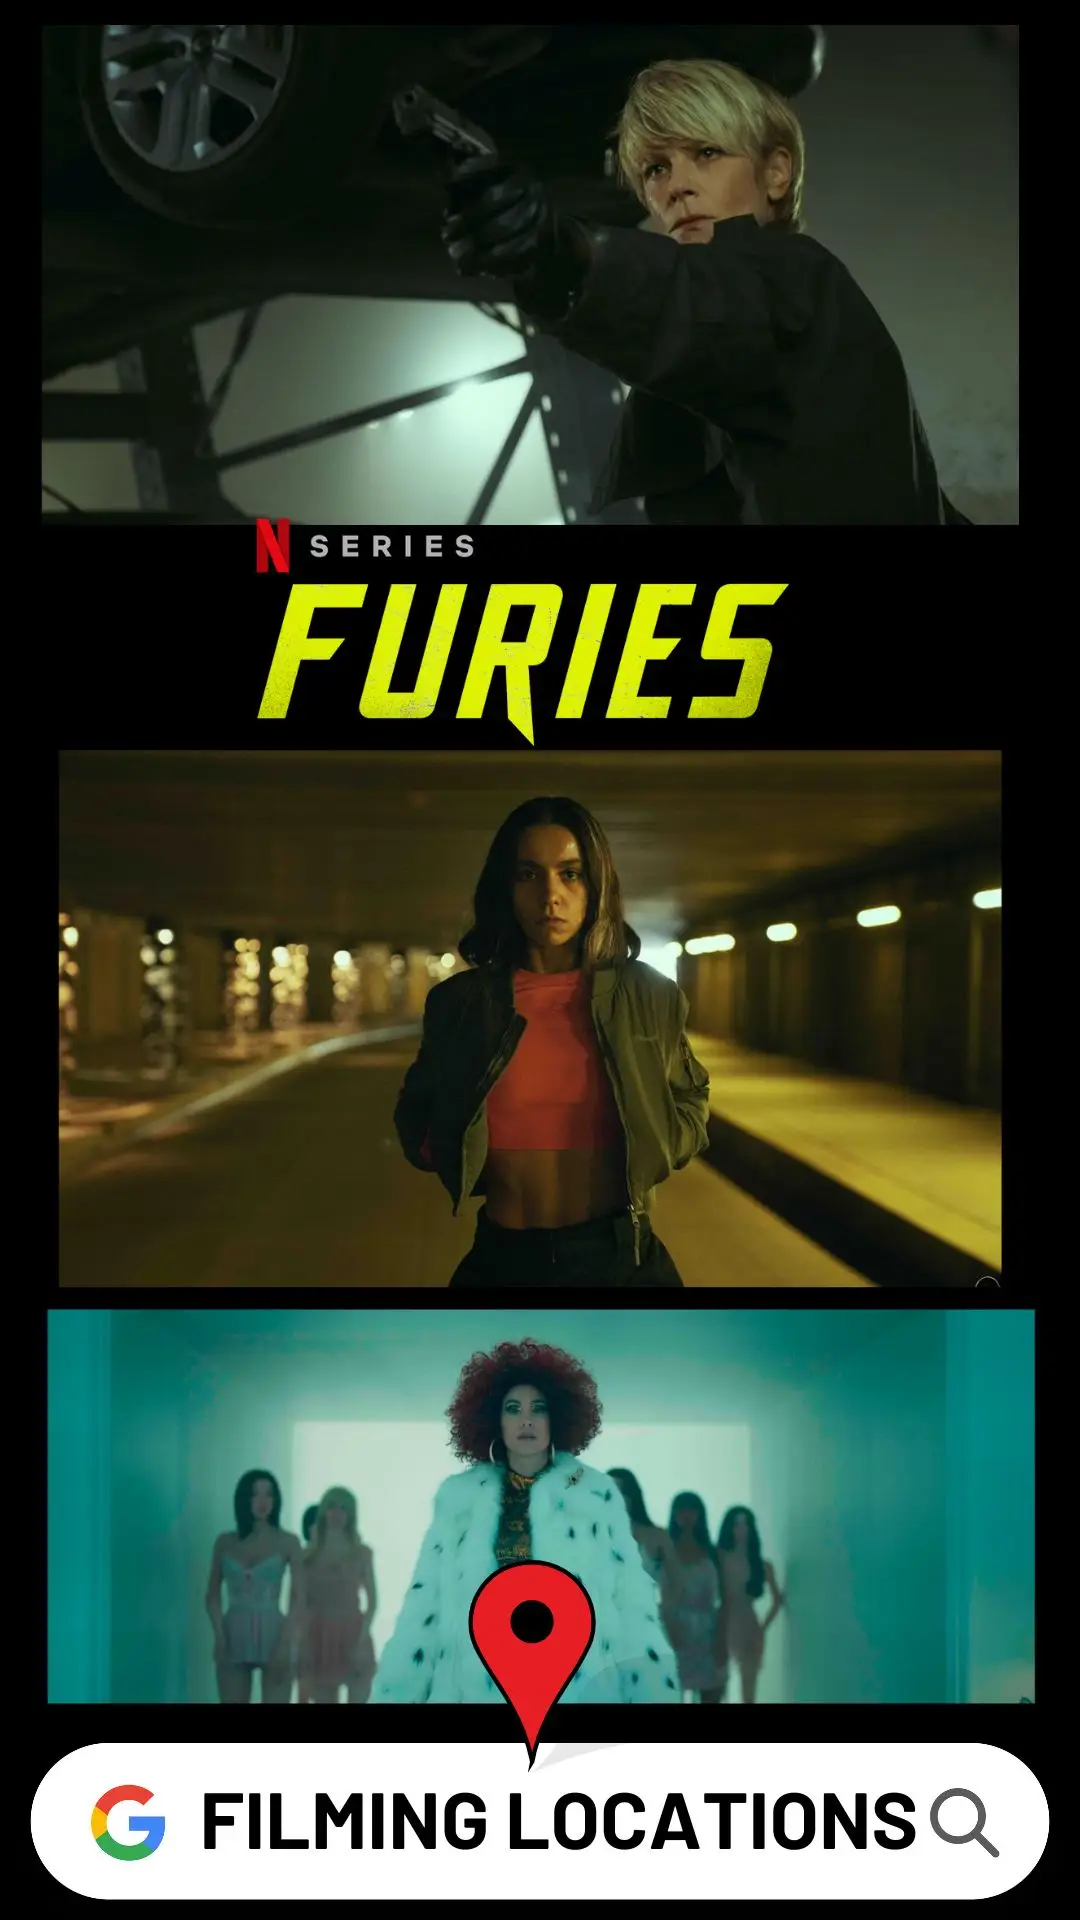 Furies Filming Locations